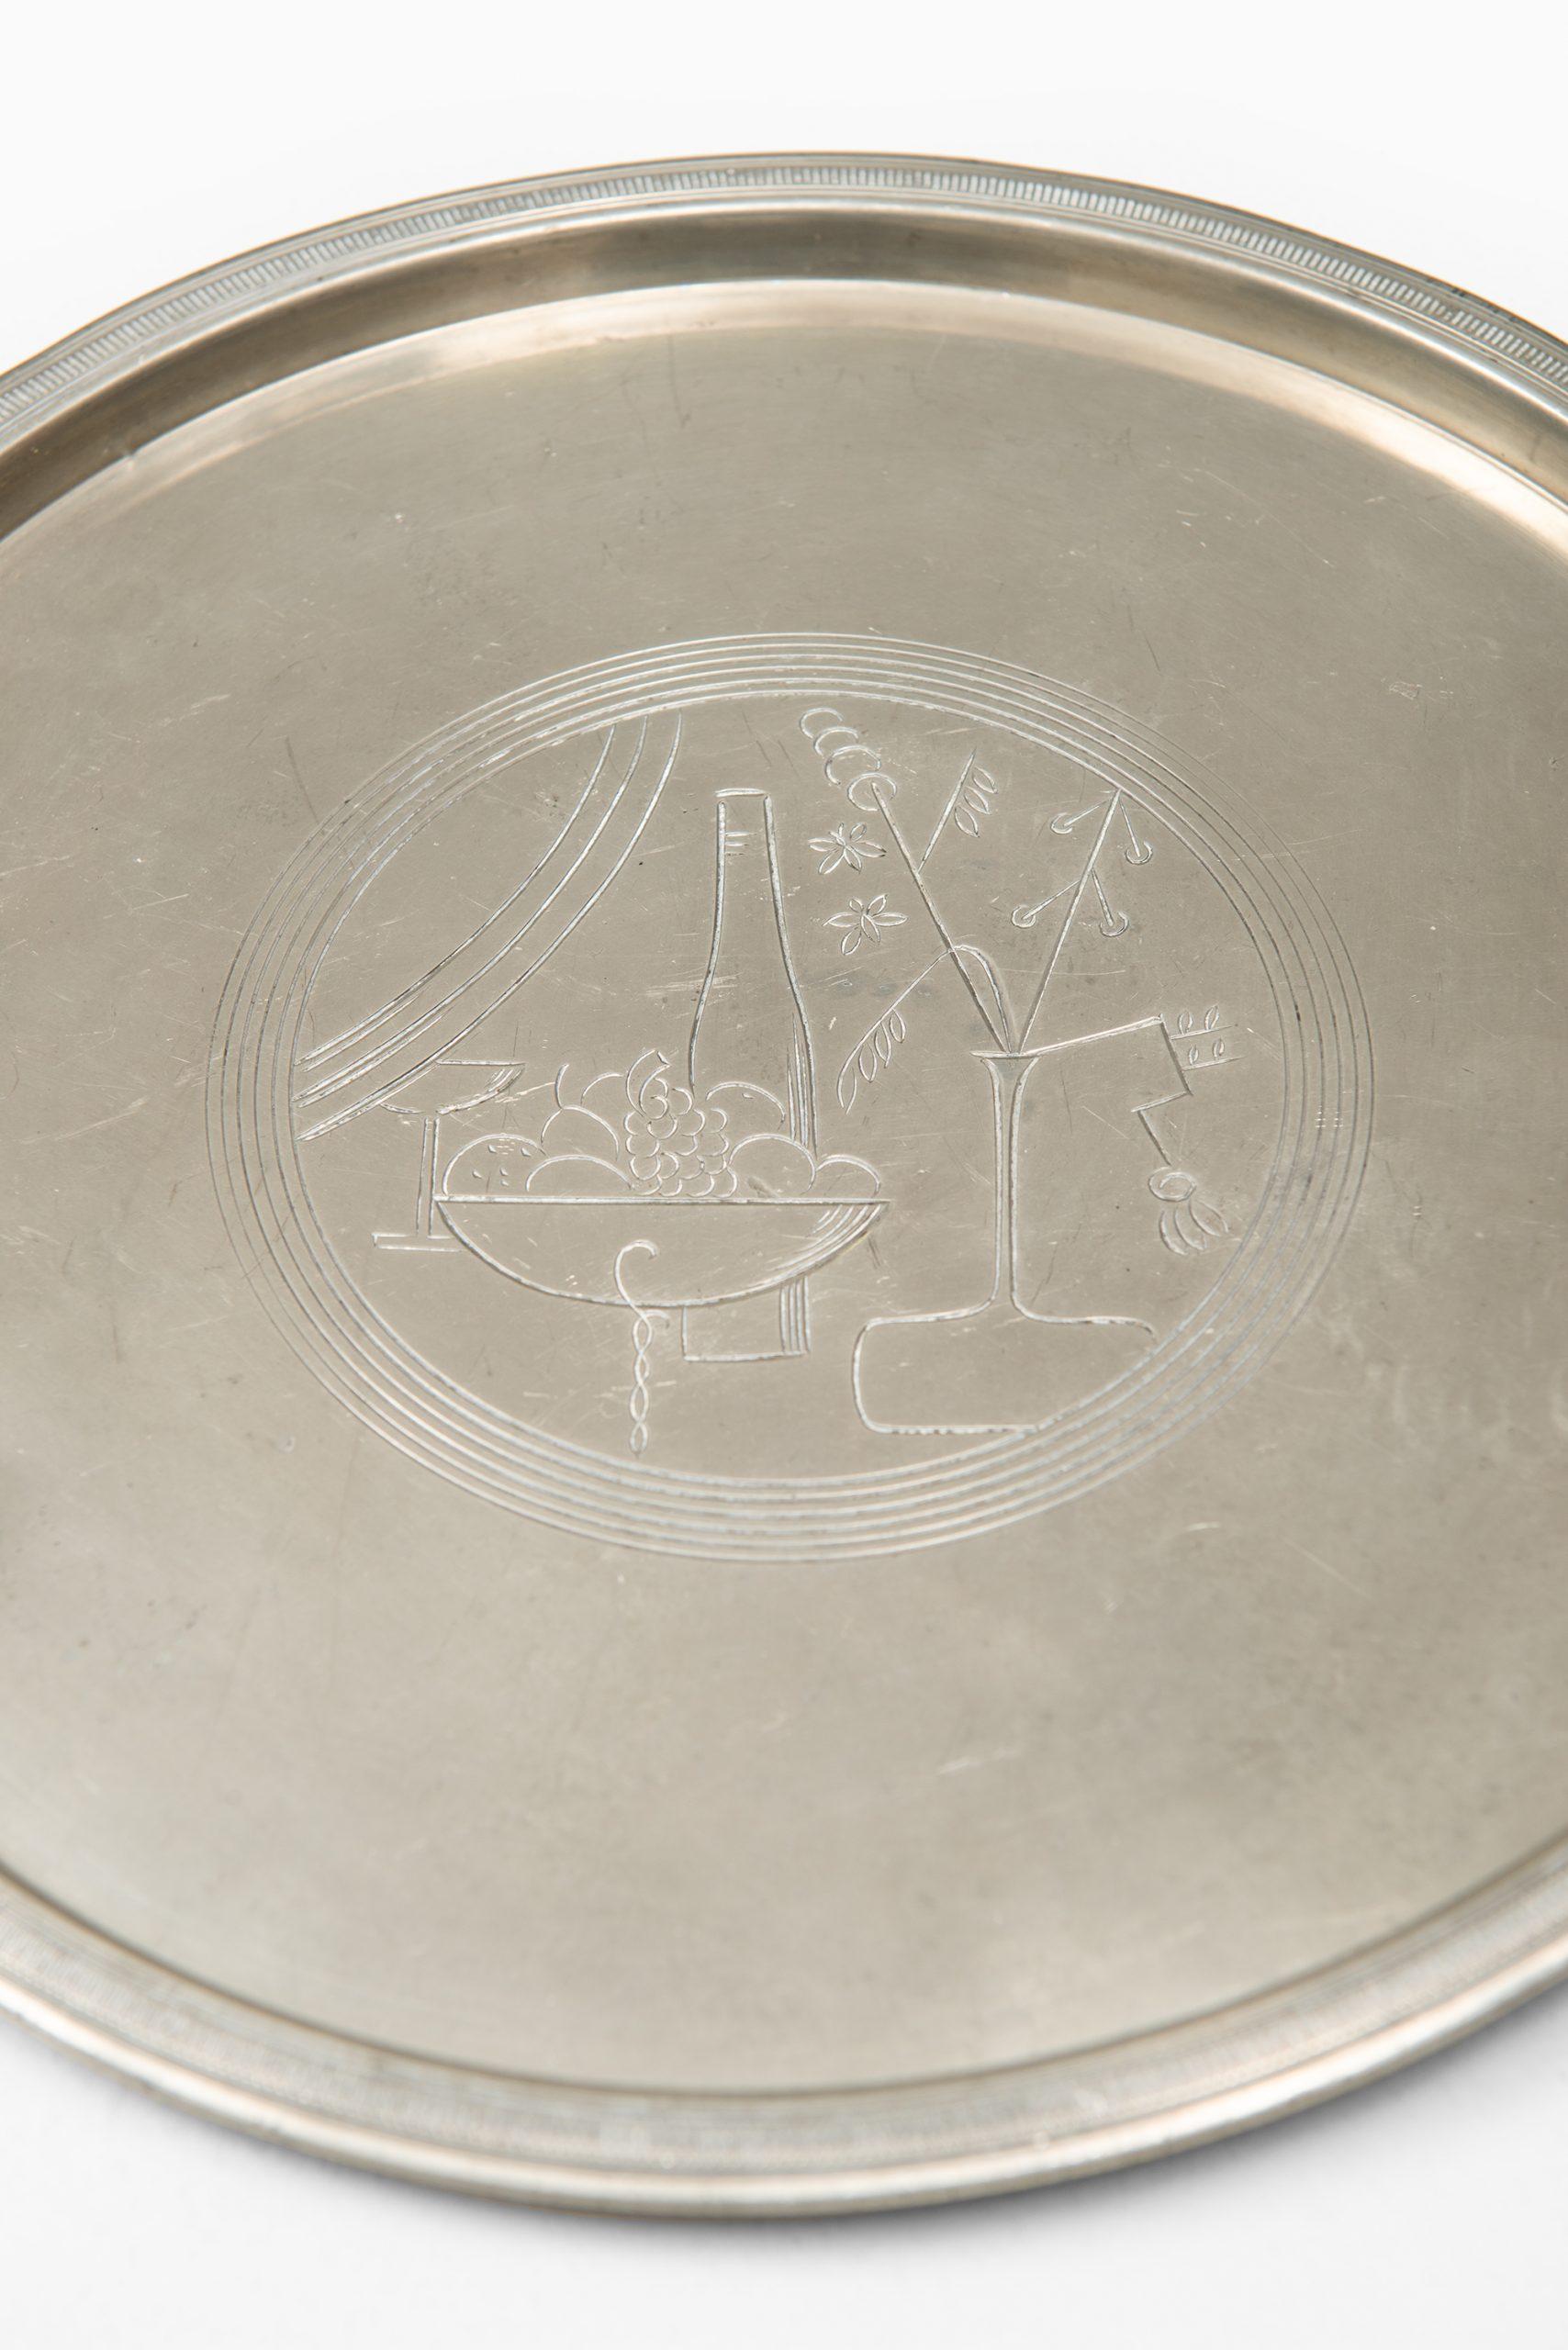 Rare serving tray designed by Sylvia Stave. Produced by C.G. Hallberg in Sweden.
 